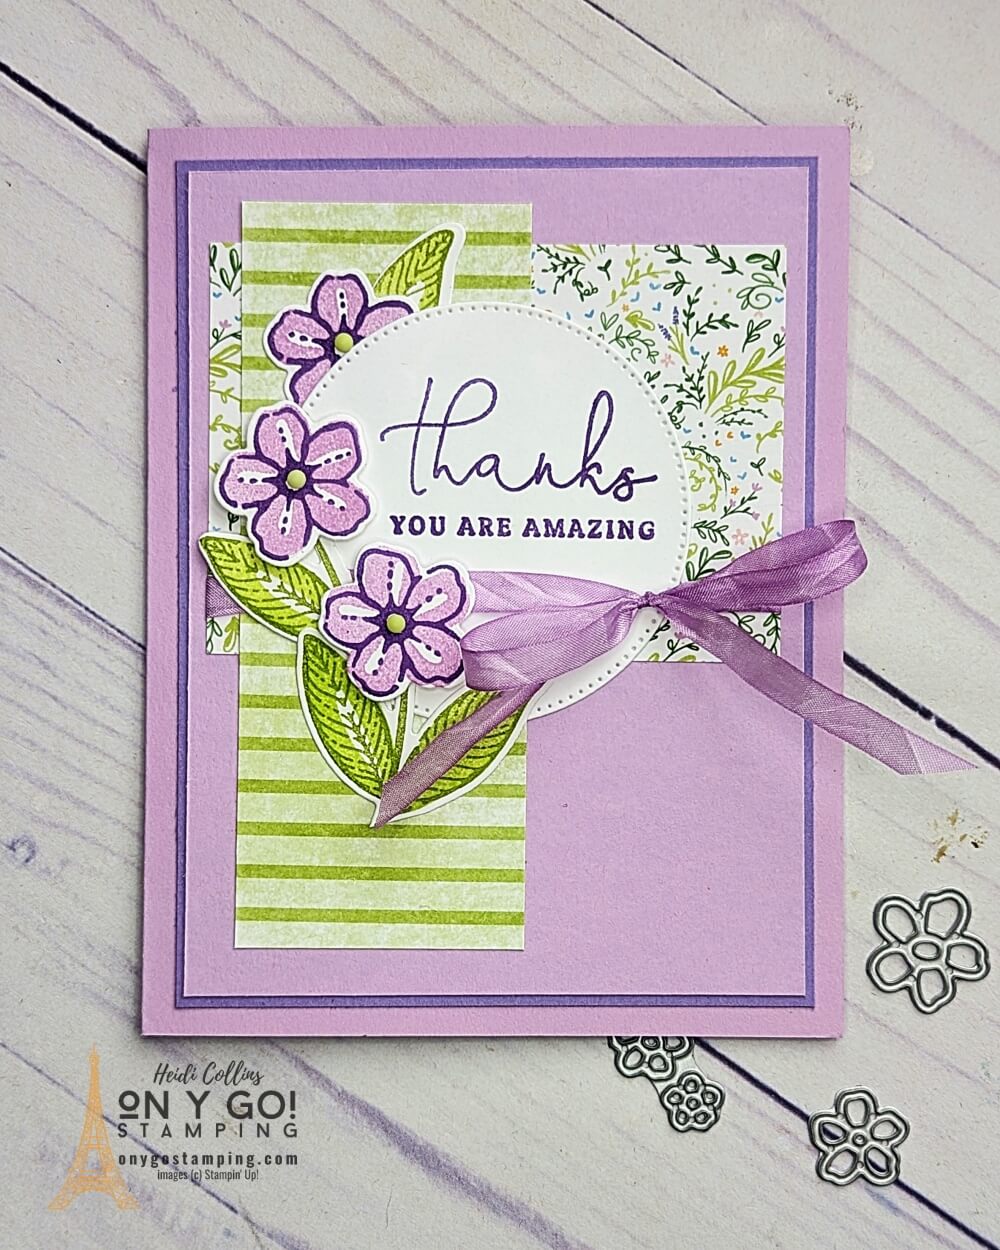 Let's get creative and start crafting! If you're looking to add a bit of extra flare to your thank you cards, then why not try creating one with a handmade card and the Sentimental Park stamp set and the Tea Boutique DSP - a beautiful floral patterned paper? Create a one-of-a-kind floral thank you card with Stampin' Up! and show your appreciation with a heartfelt design!